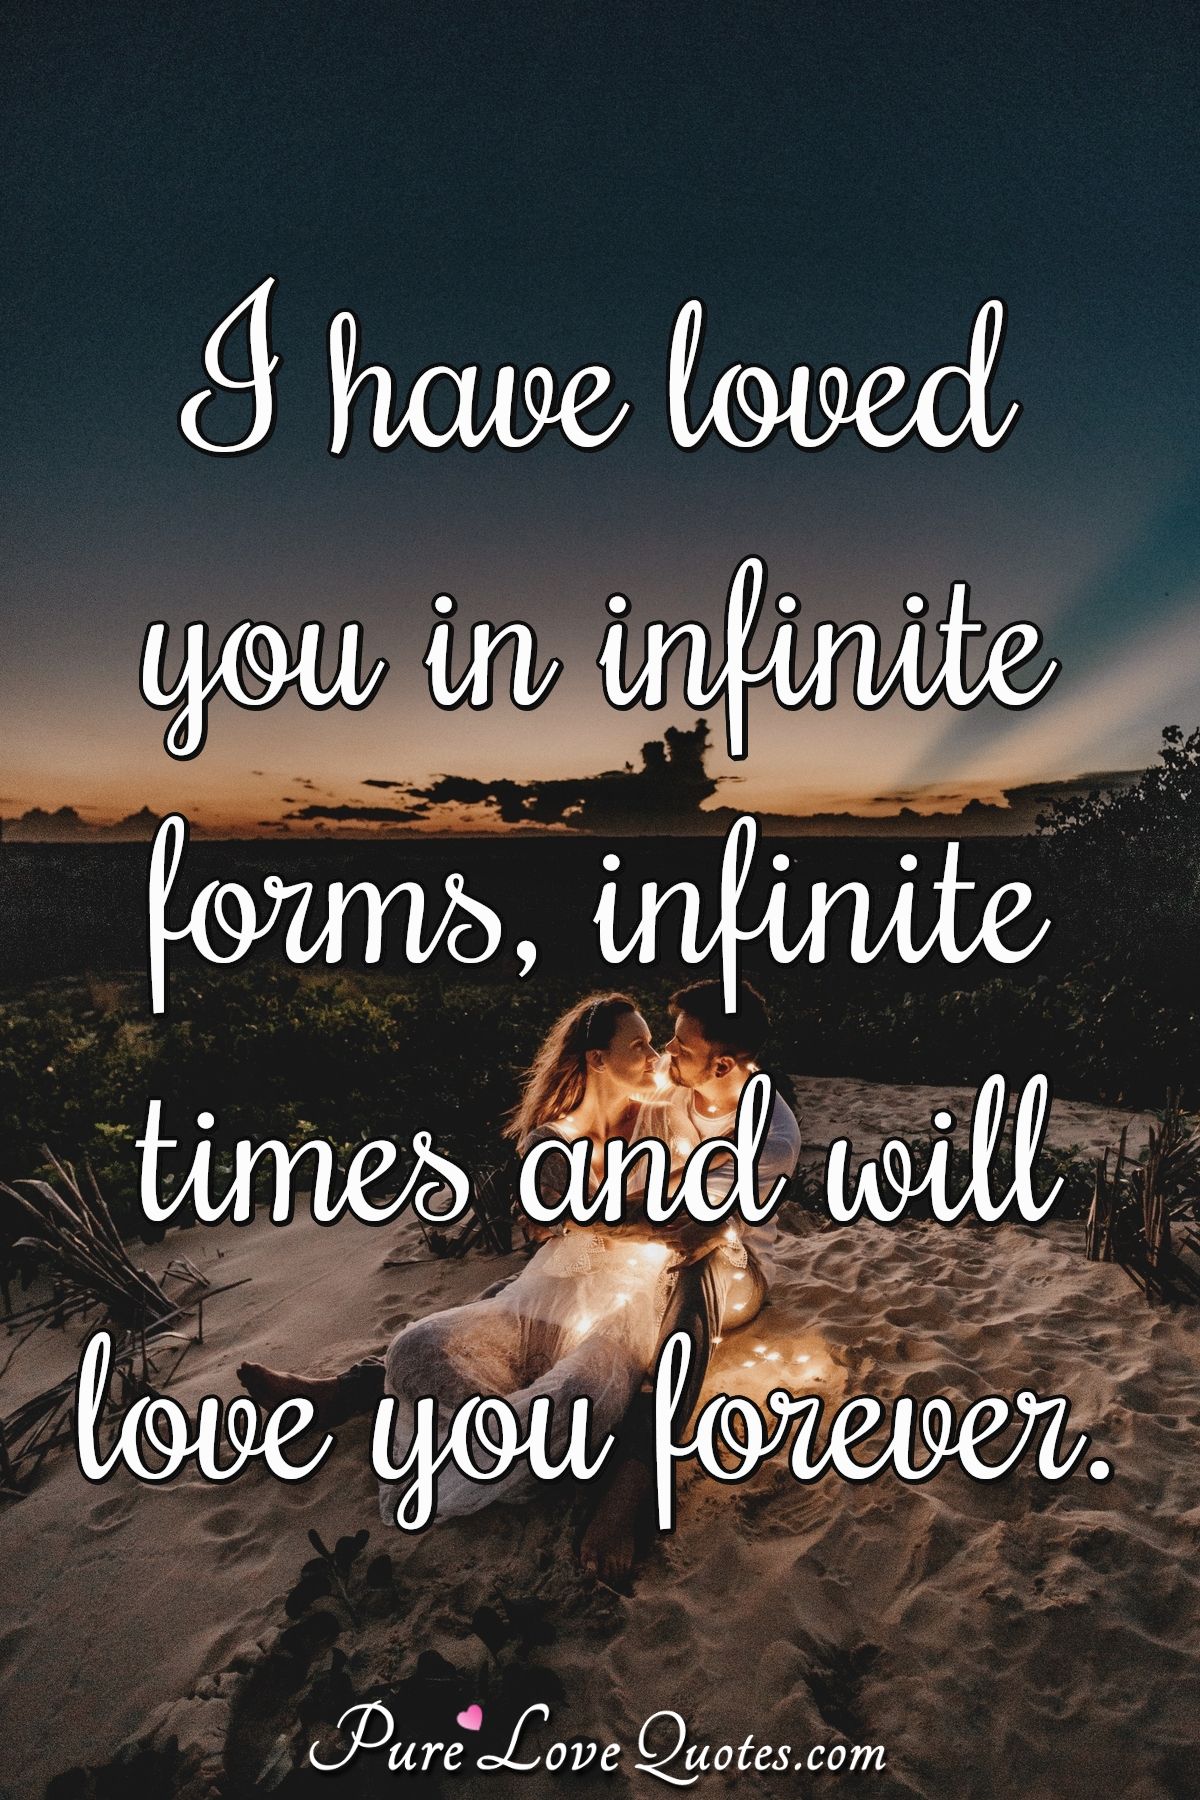 I have loved you in infinite forms, infinite times and will love you forever. - Anonymous